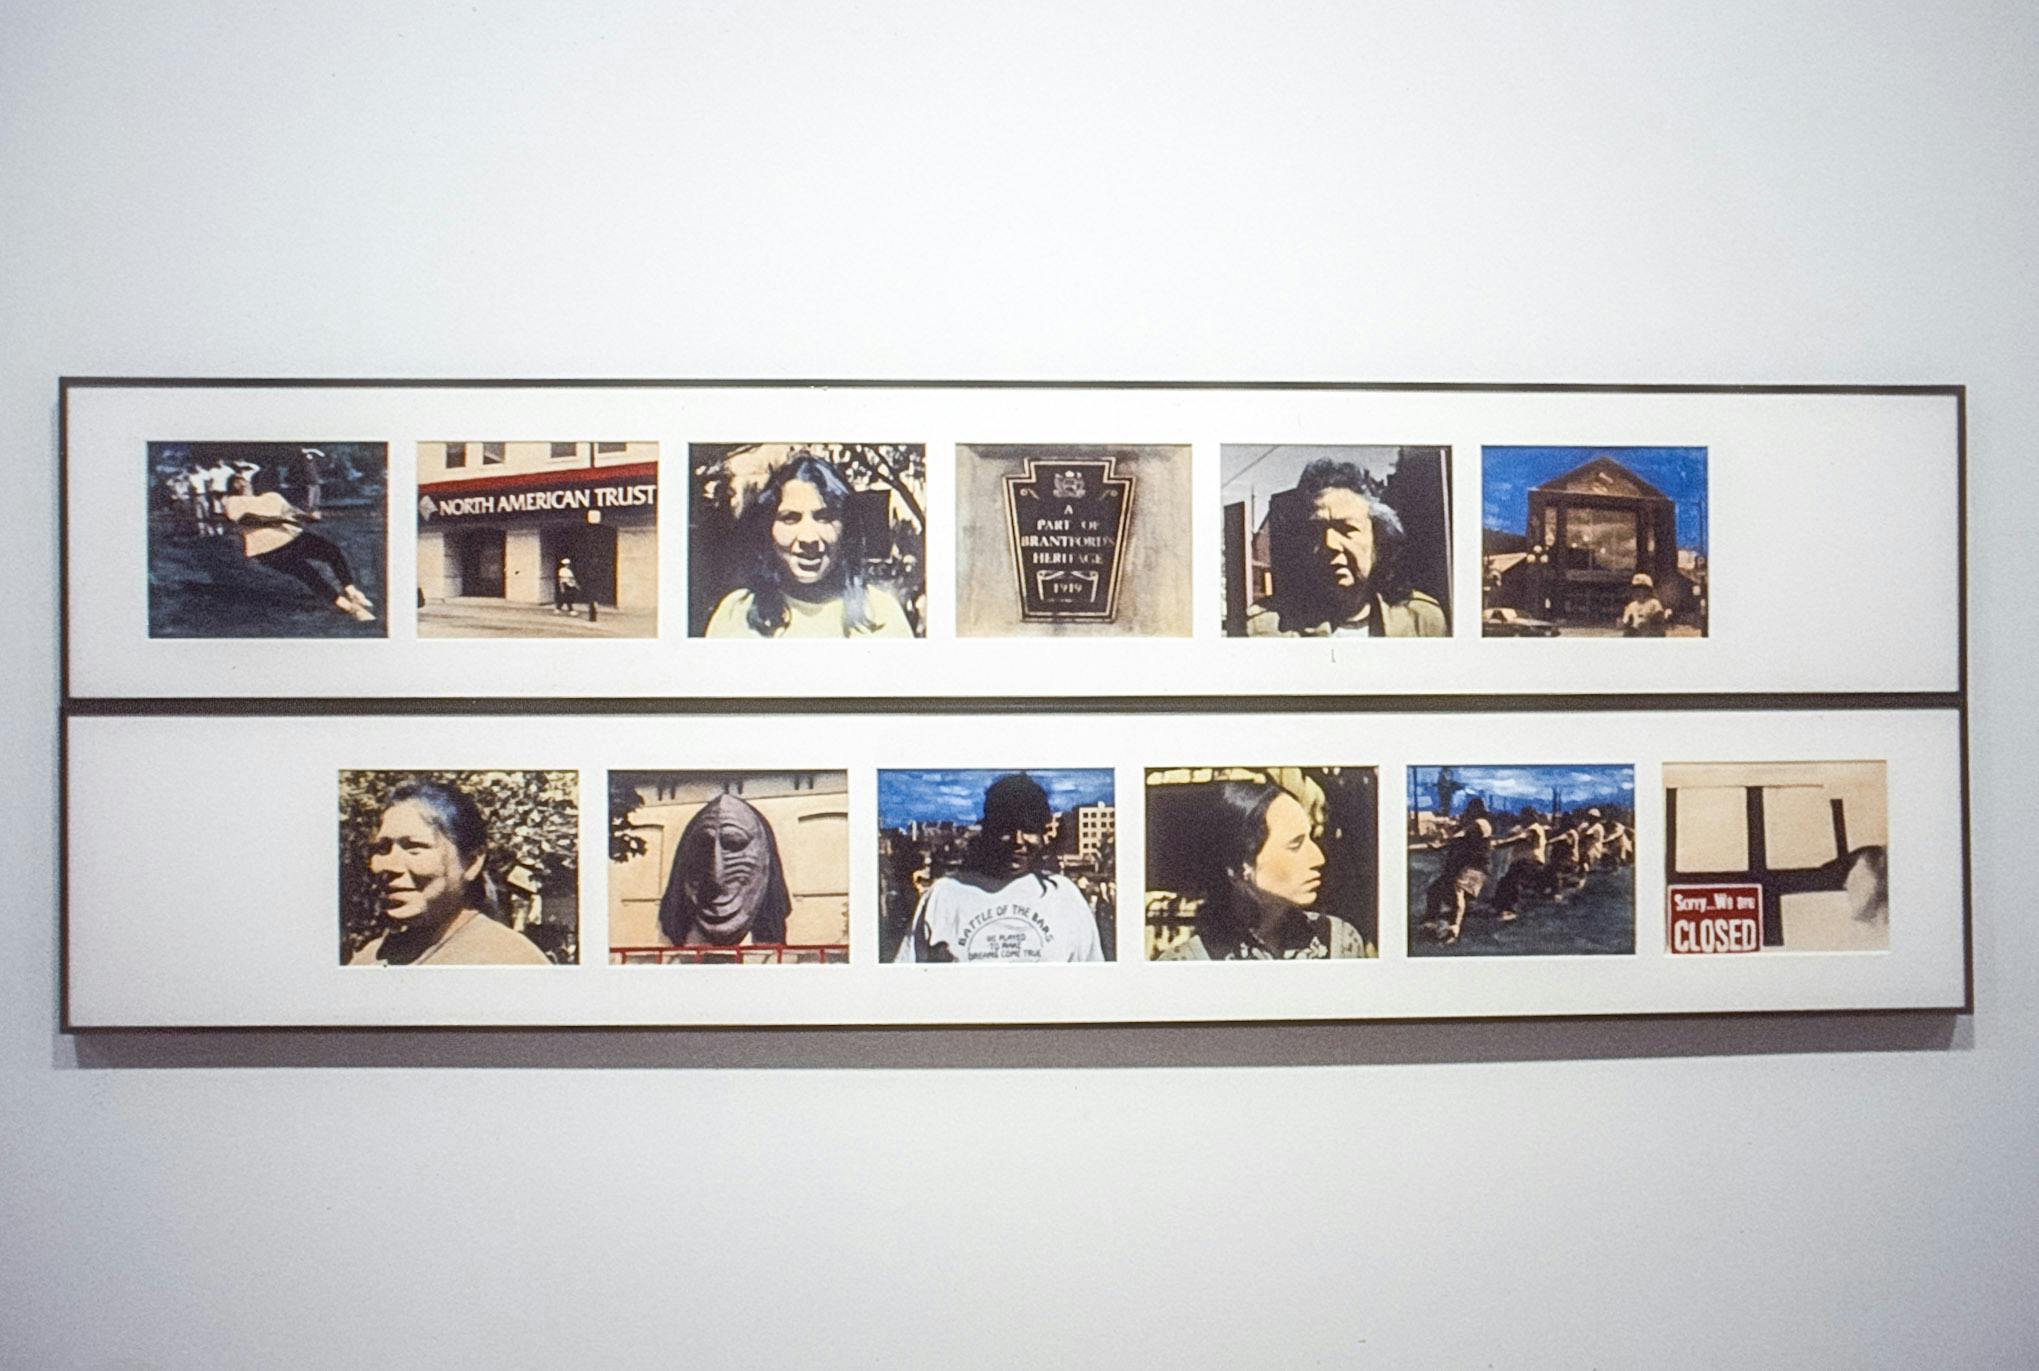 A close-up photo of the artwork mounted on a gallery wall. Two rows of six colored photographs are closely lined up horizontally. Some photographs capture people’s faces, plaques, and road signs.  